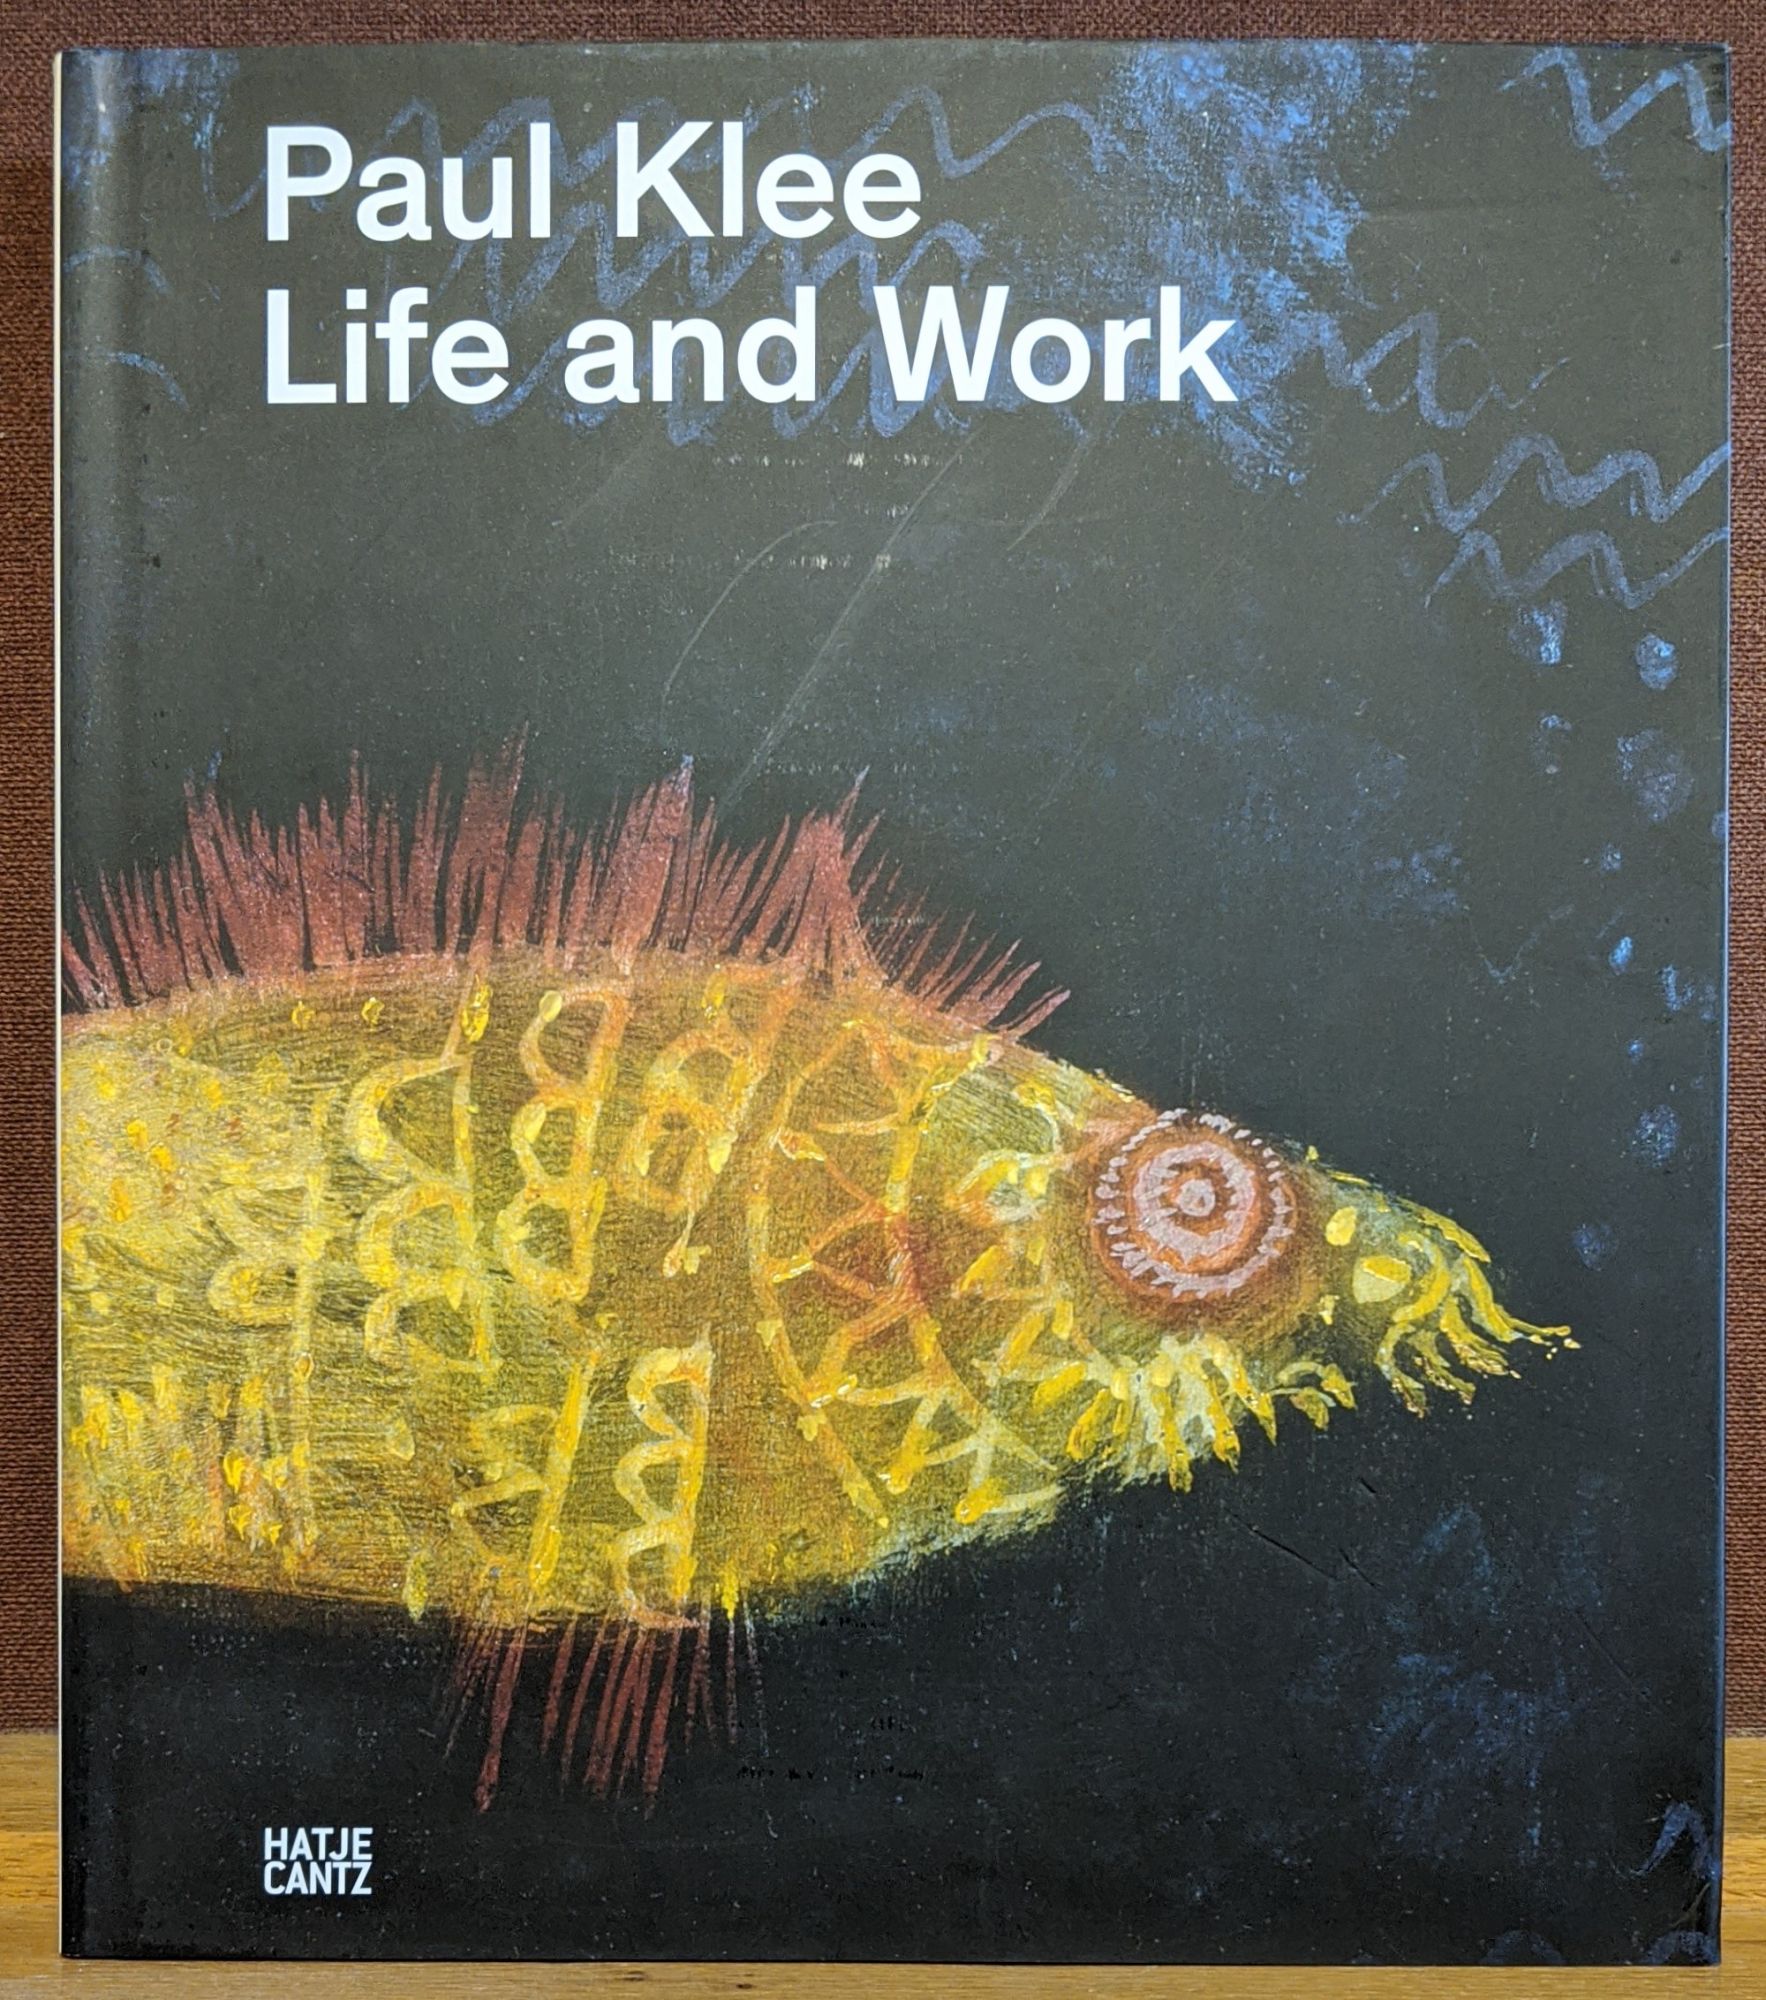 Paul Klee, Life and Work by Paul Klee on Moe's Books